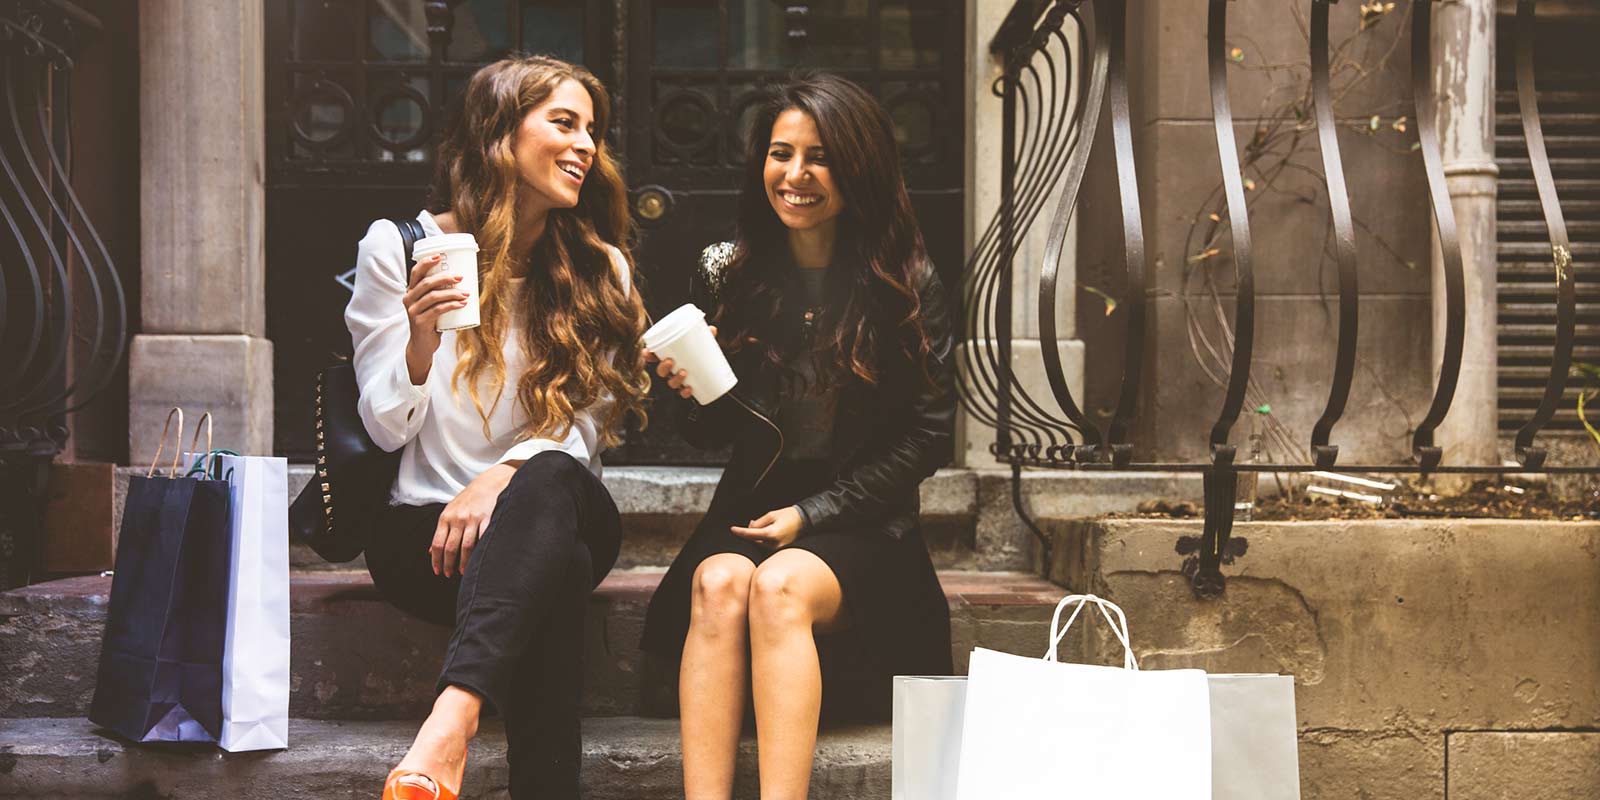 Two women sit on steps and enjoy coffee together after a day of shopping in the city.